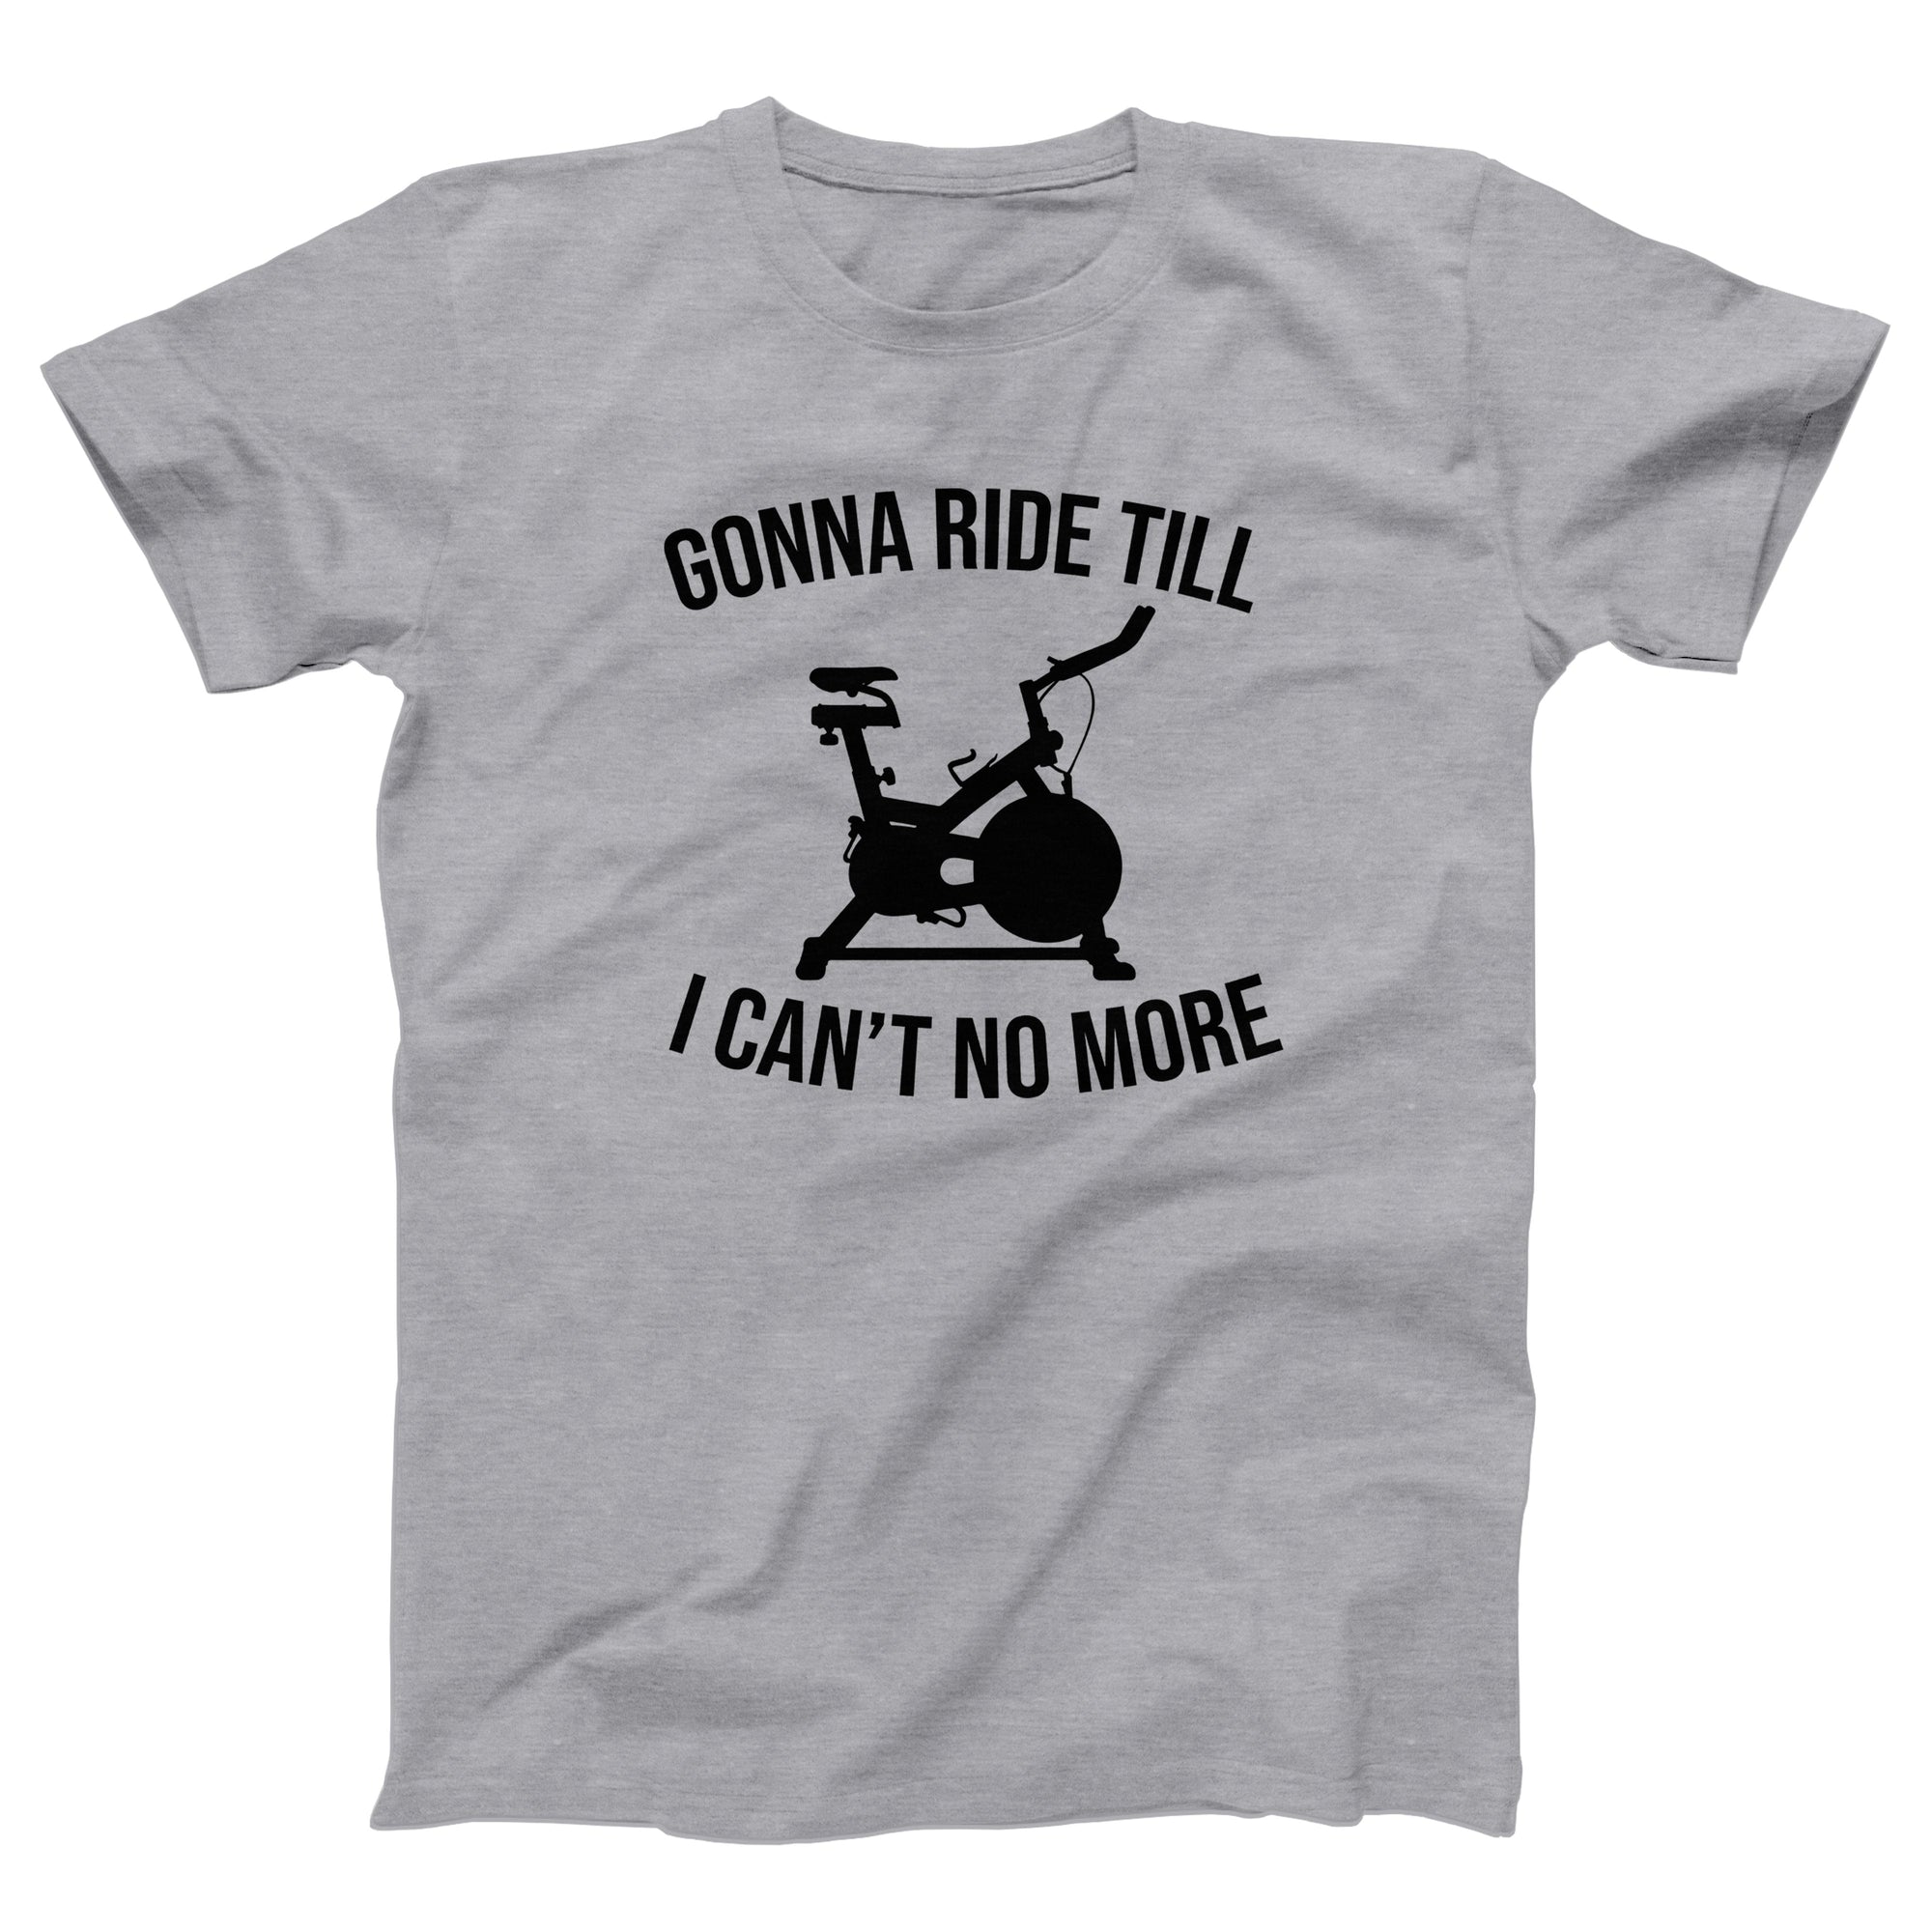 Ride Till I Can't No More Adult Unisex T-Shirt - Twisted Gorilla